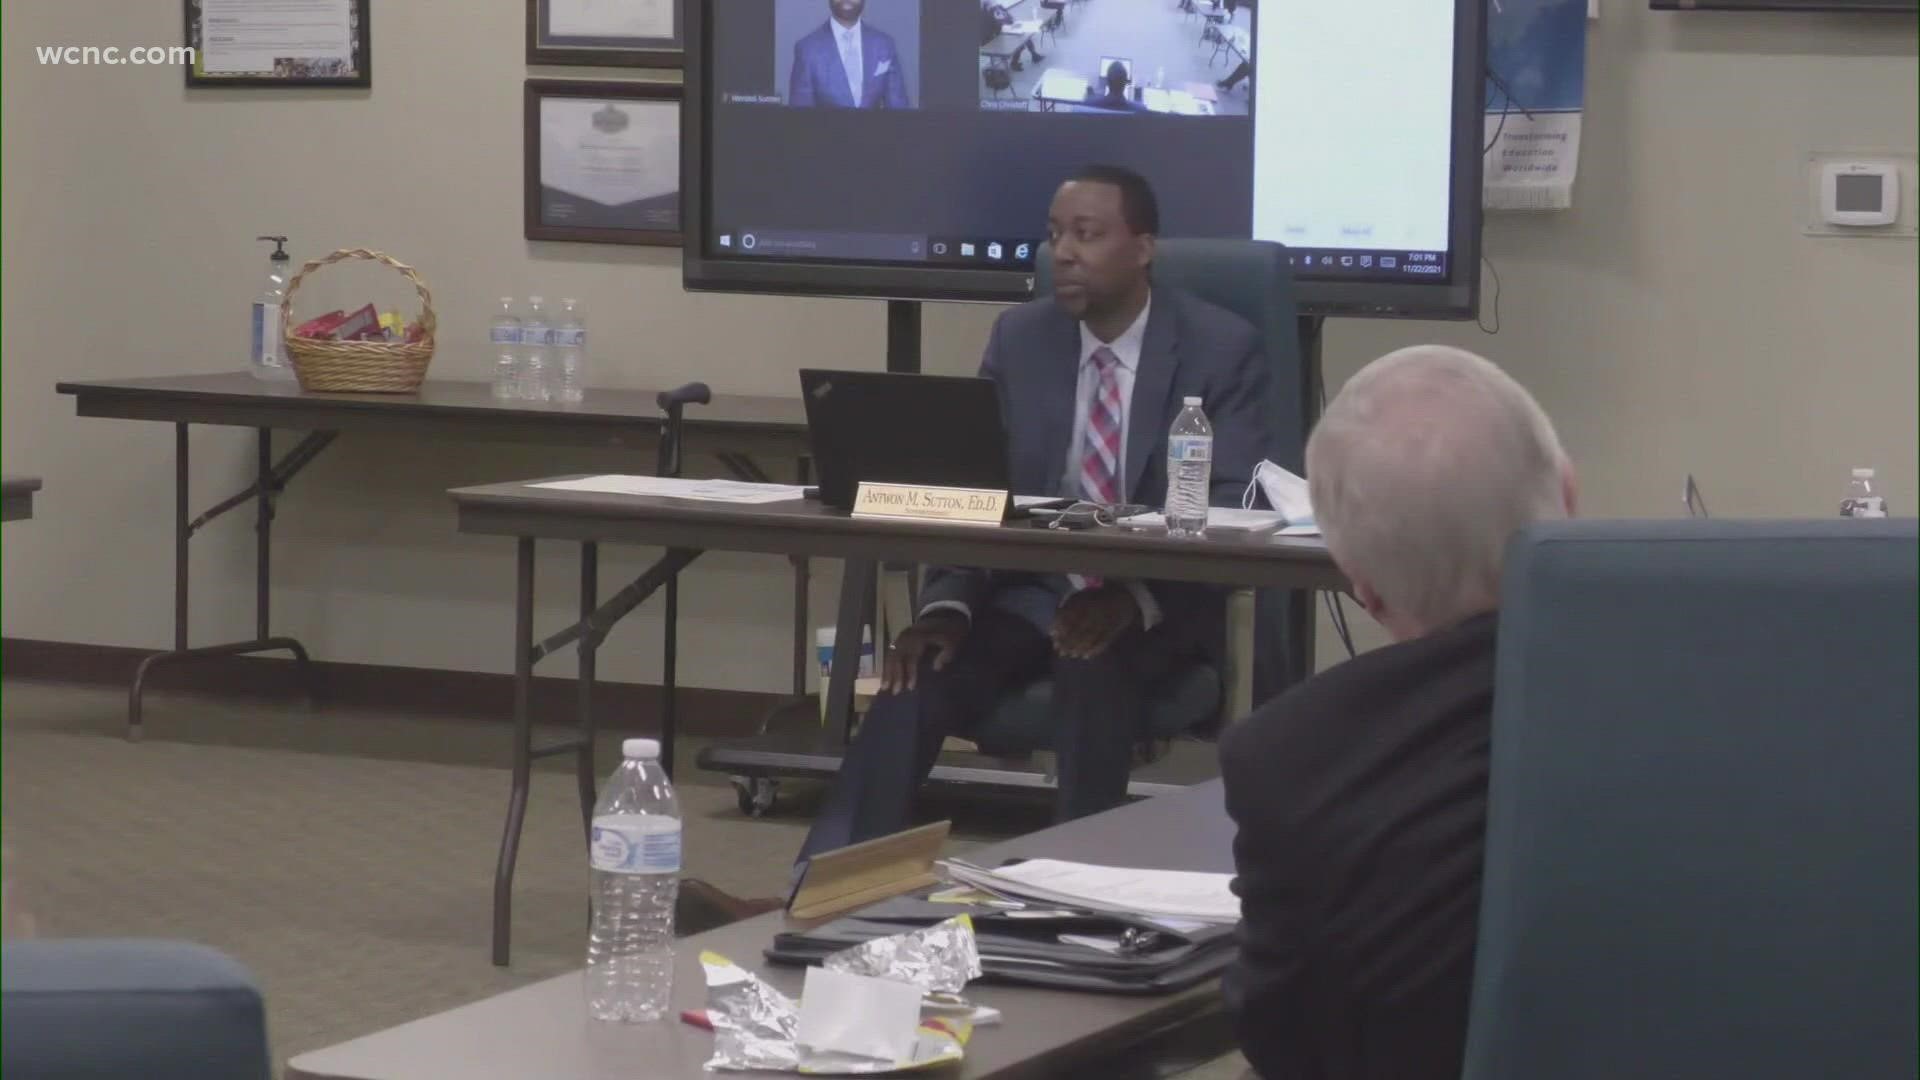 Chester County Schools are working to improve race relations within the school.